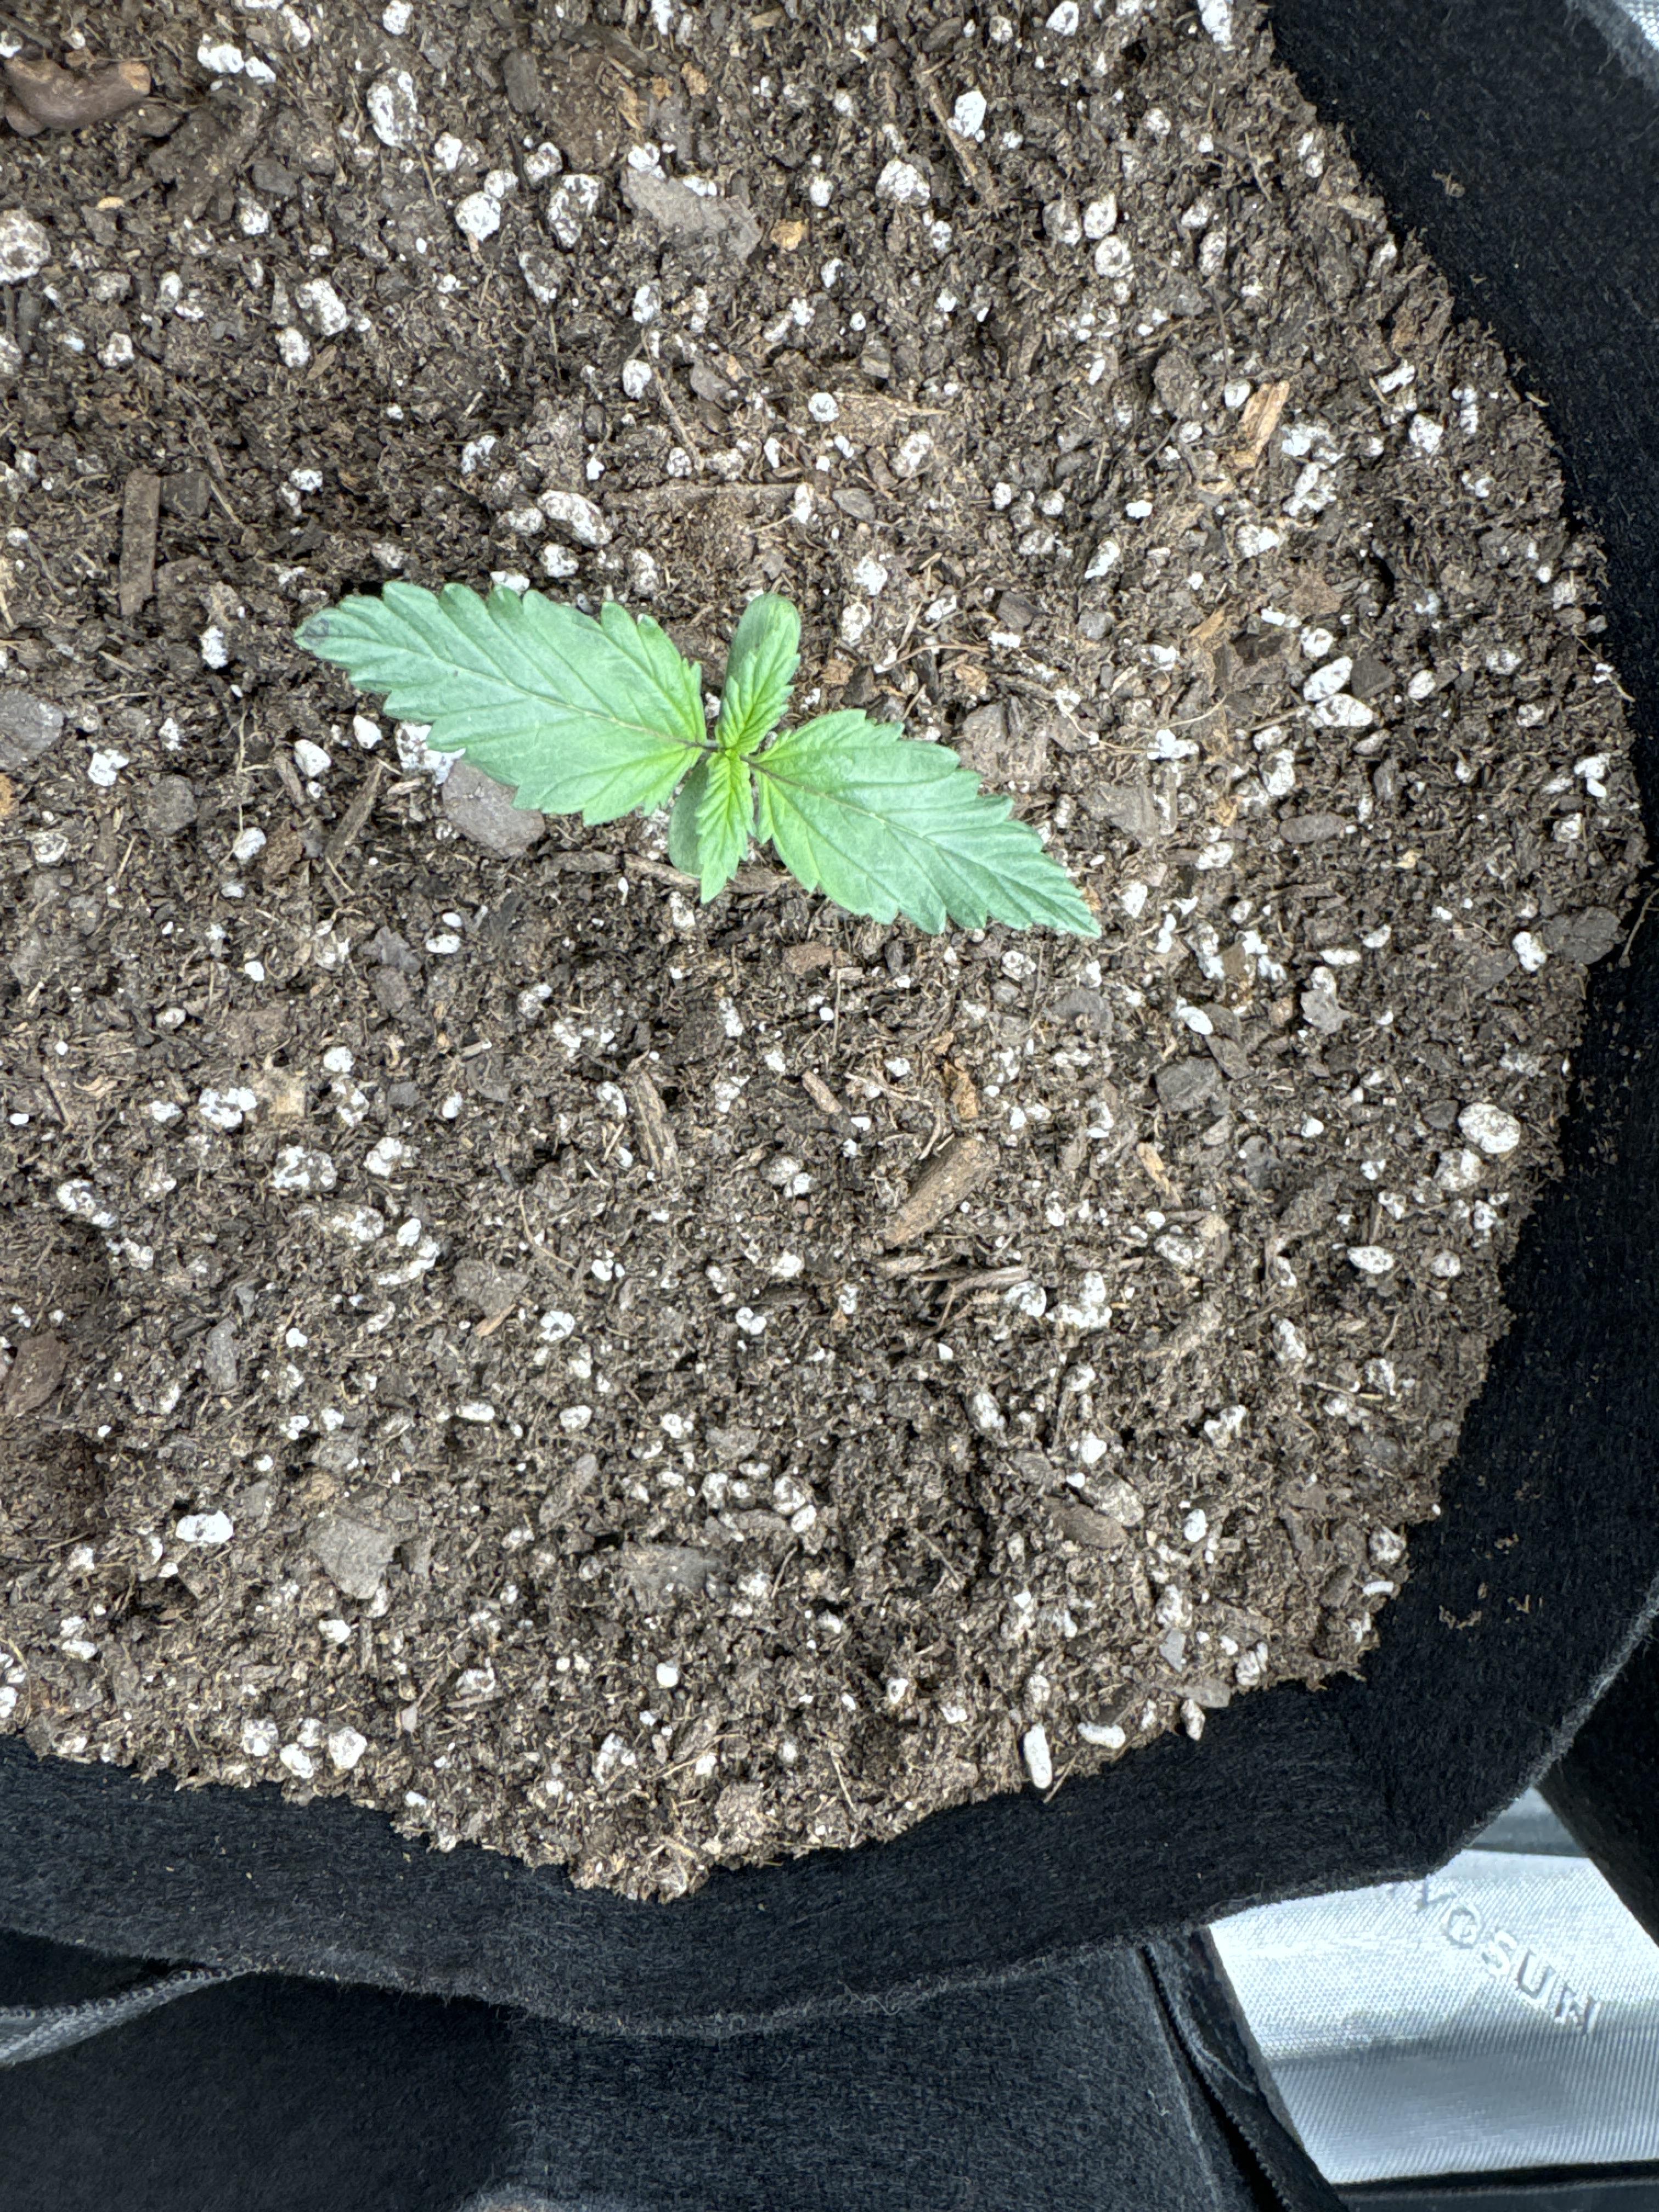 Watermelon planted 1/5/24